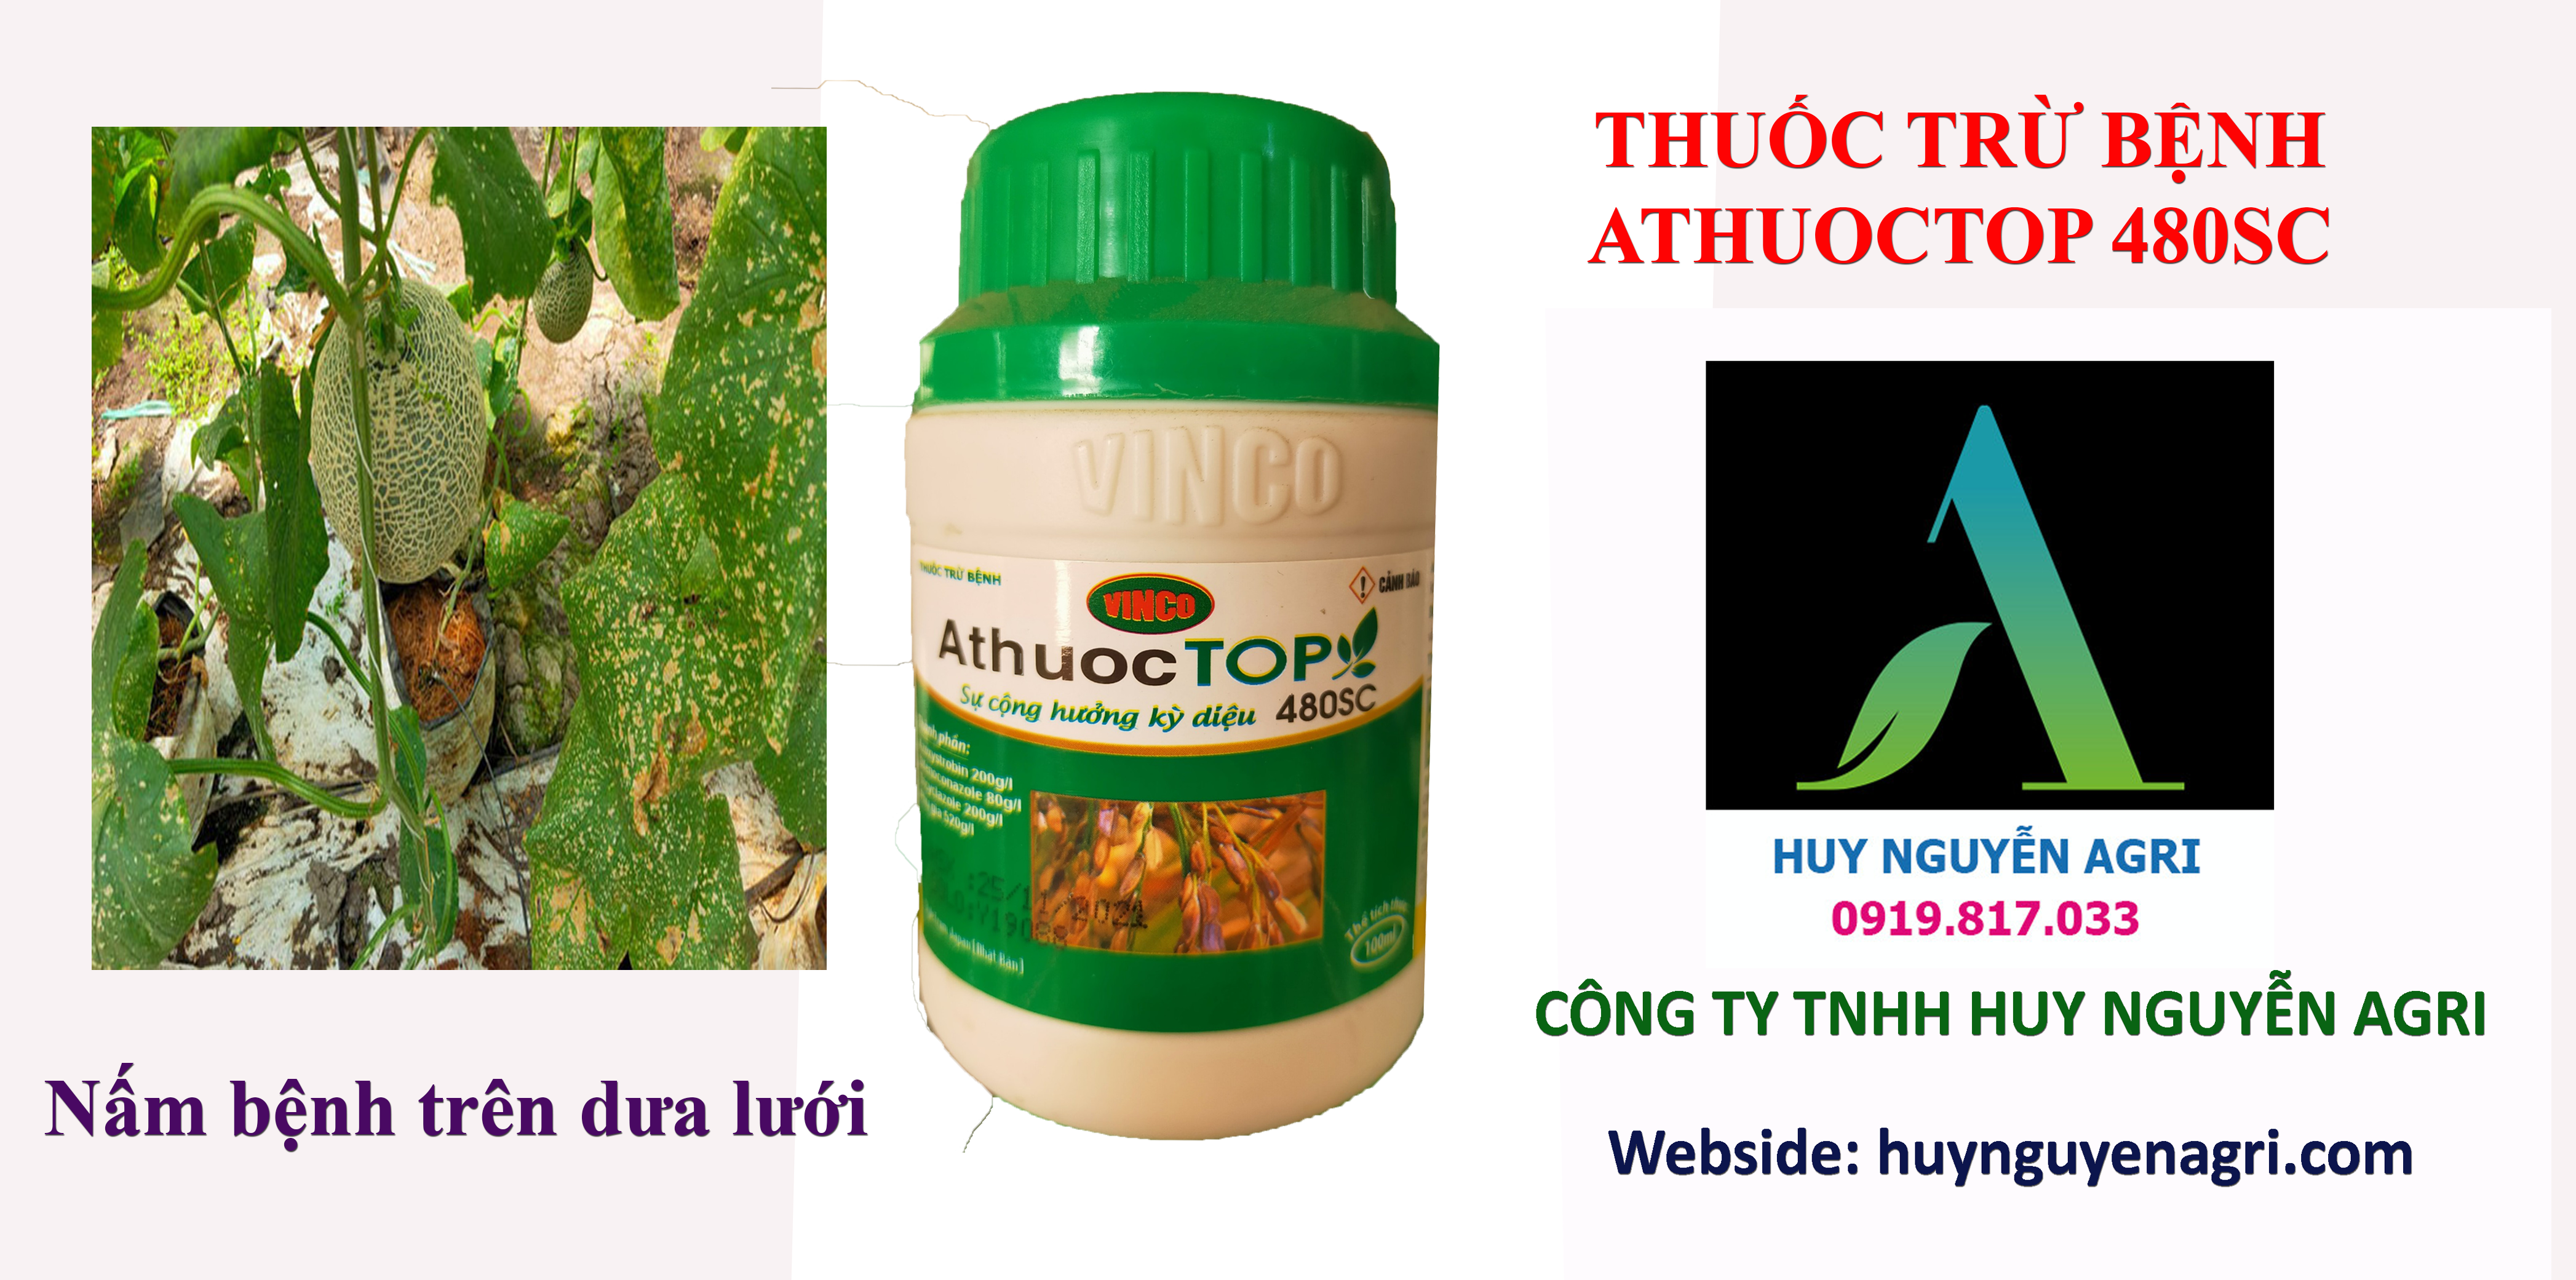 ATHUOCTOP 480SC